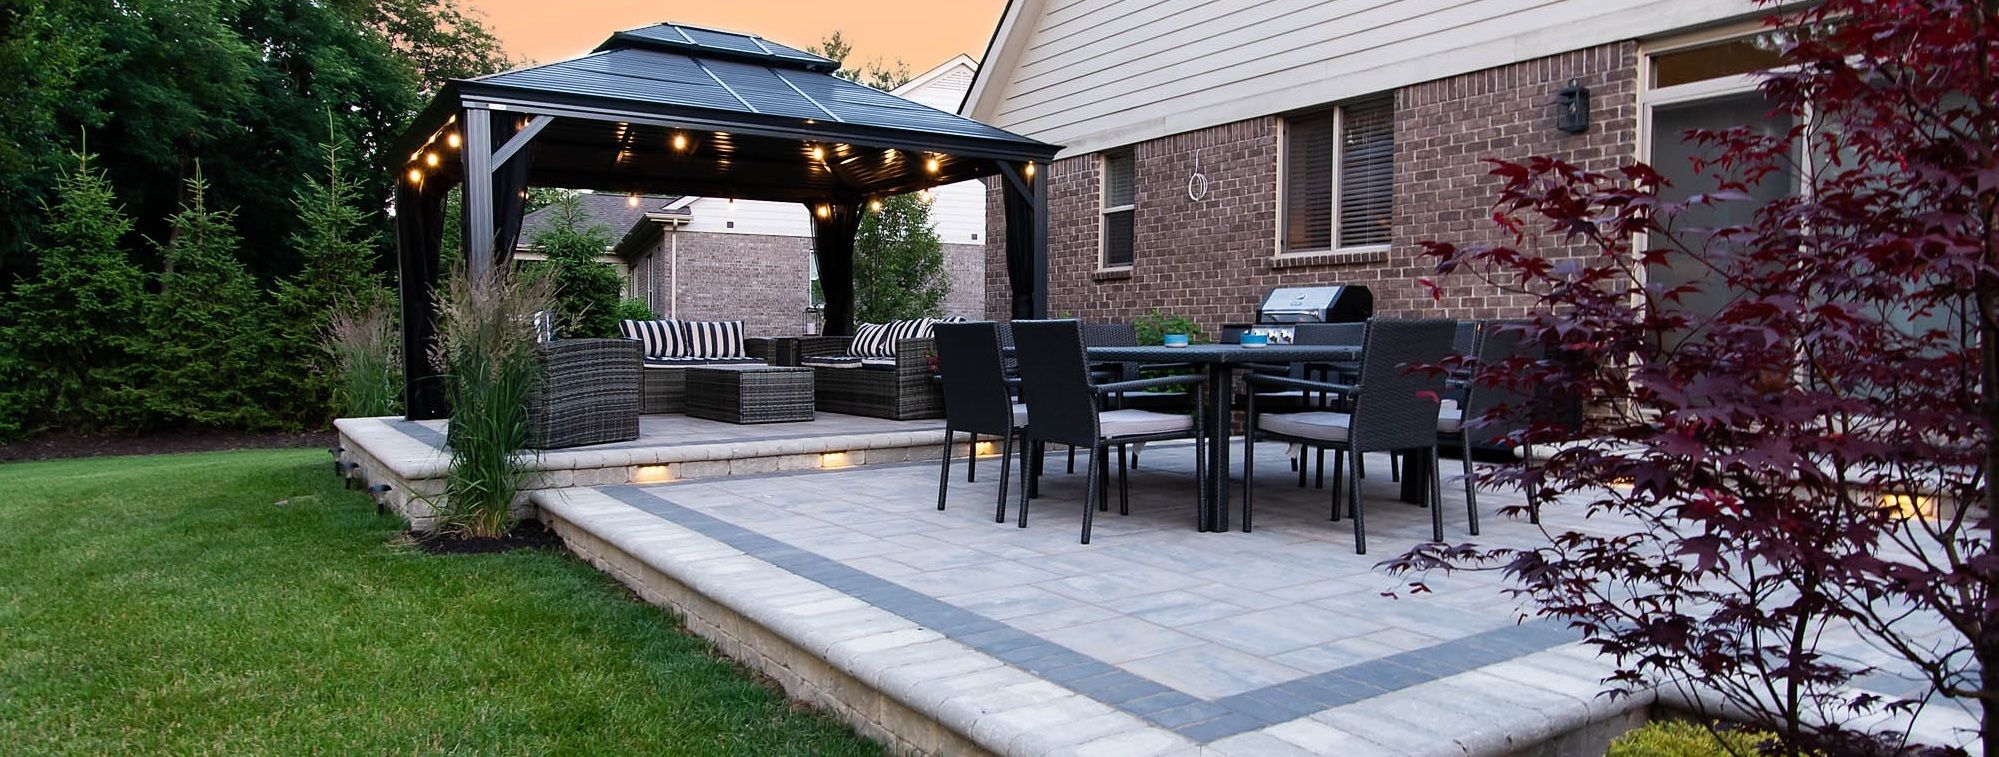 Brick patio with gazebo, table, and chairs.